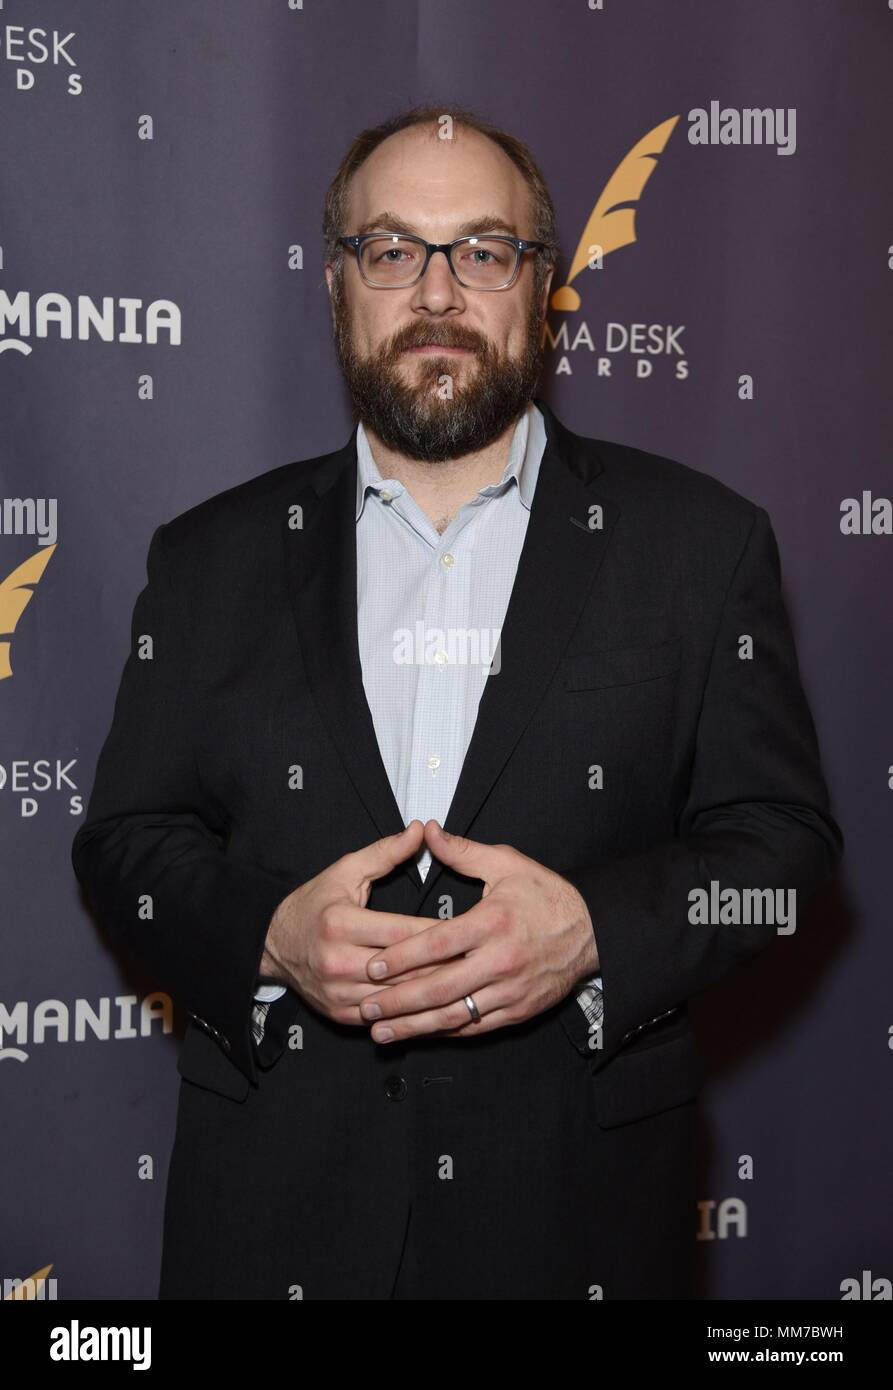 New York, NY, USA. 9th May, 2018. Alexander Gemignani at arrivals for 63rd Annual Drama Desk Awards Nominees Reception, Friedmans, New York, NY May 9, 2018. Credit: Derek Storm/Everett Collection/Alamy Live News Stock Photo